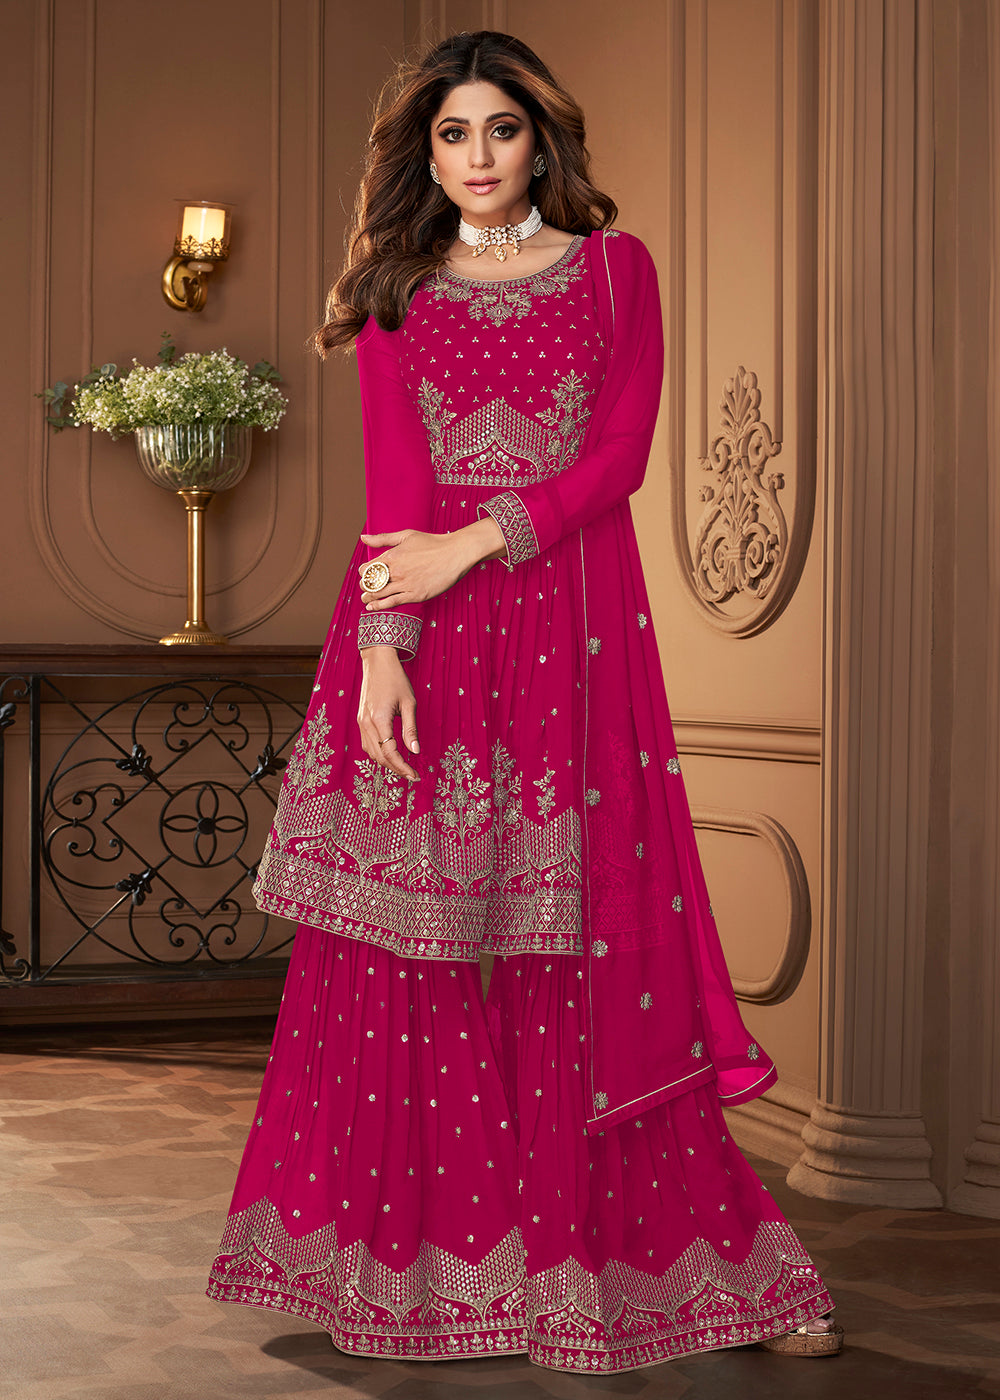 Shop Now Peplum Designed Hot Pink Embroidered Sharara Suit Online at Empress Clothing in USA, UK, Canada, Germany & Worldwide.